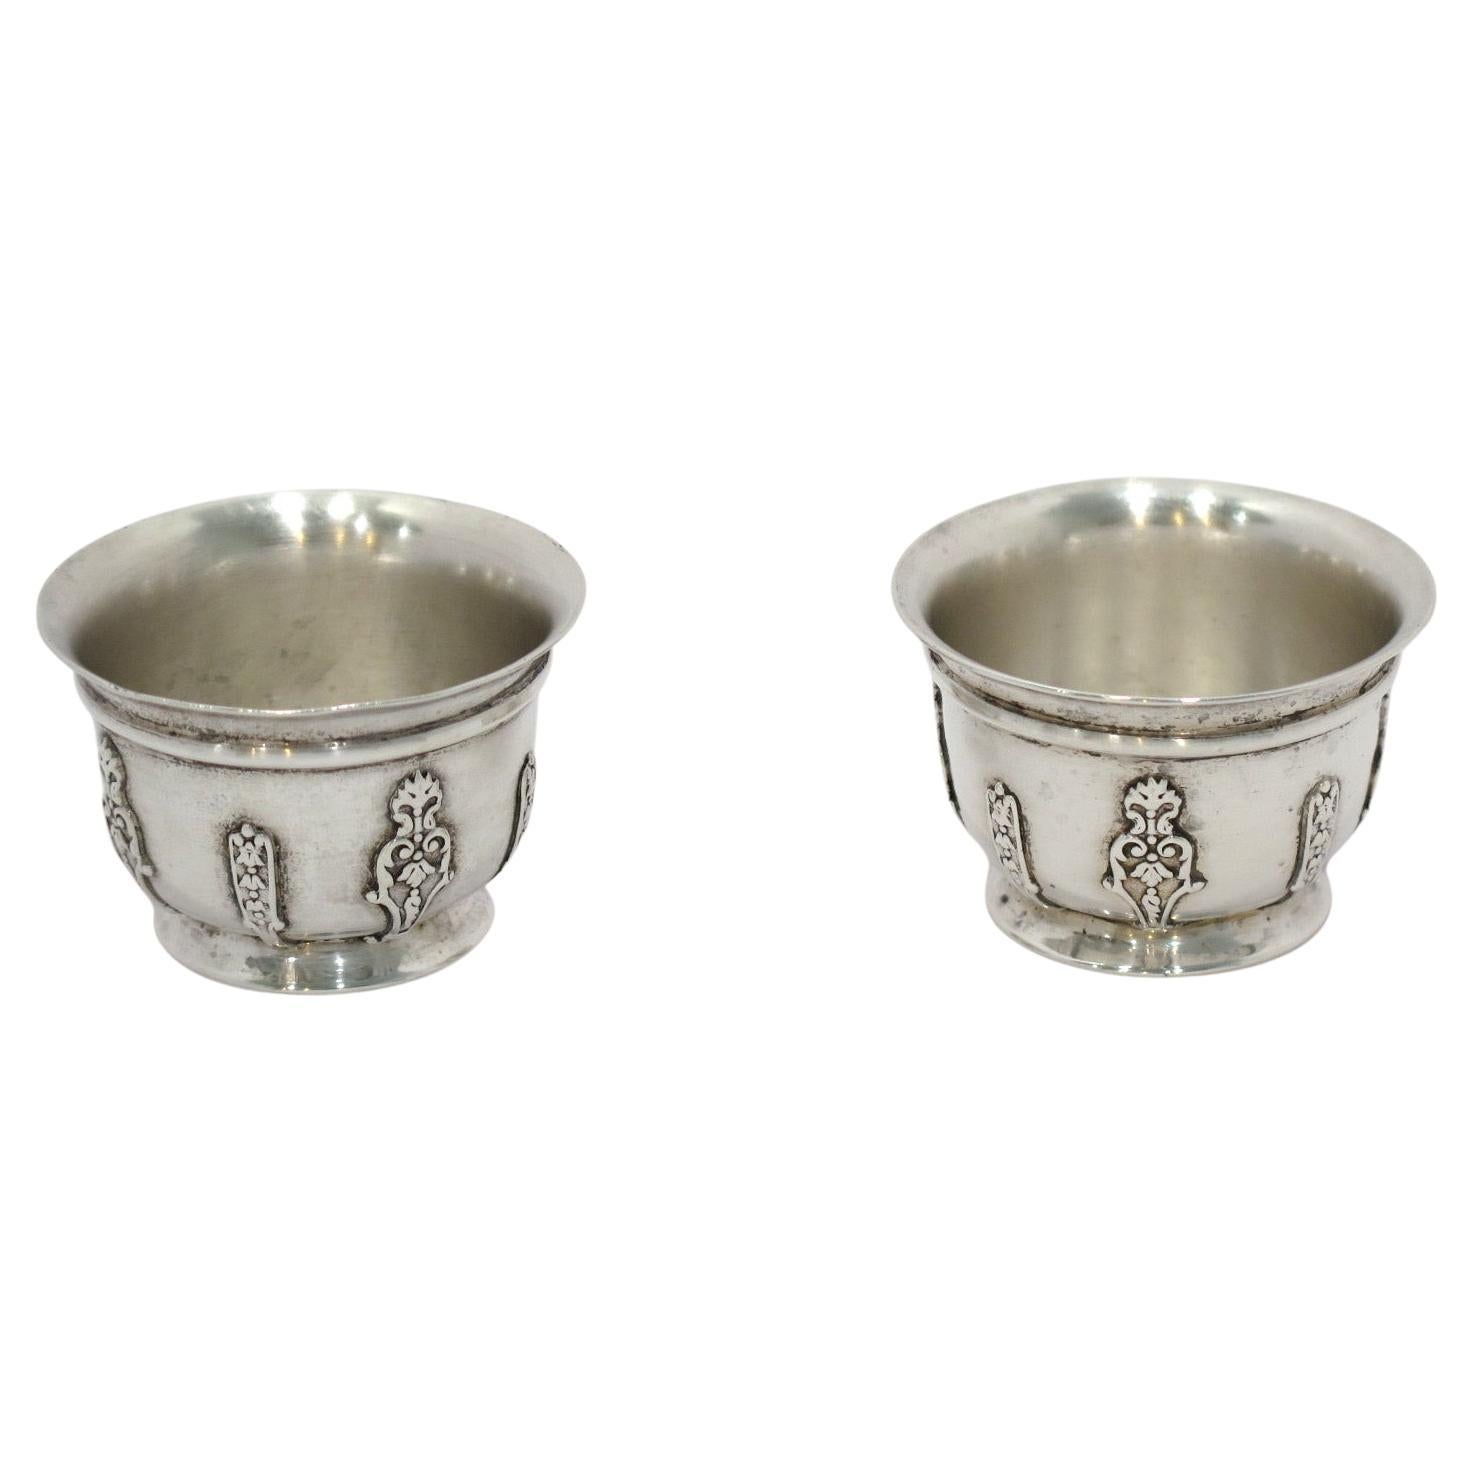 2 3/8 in - Sterling Silver G & S Co. Antique English 1900 Salt & Pepper Cellars